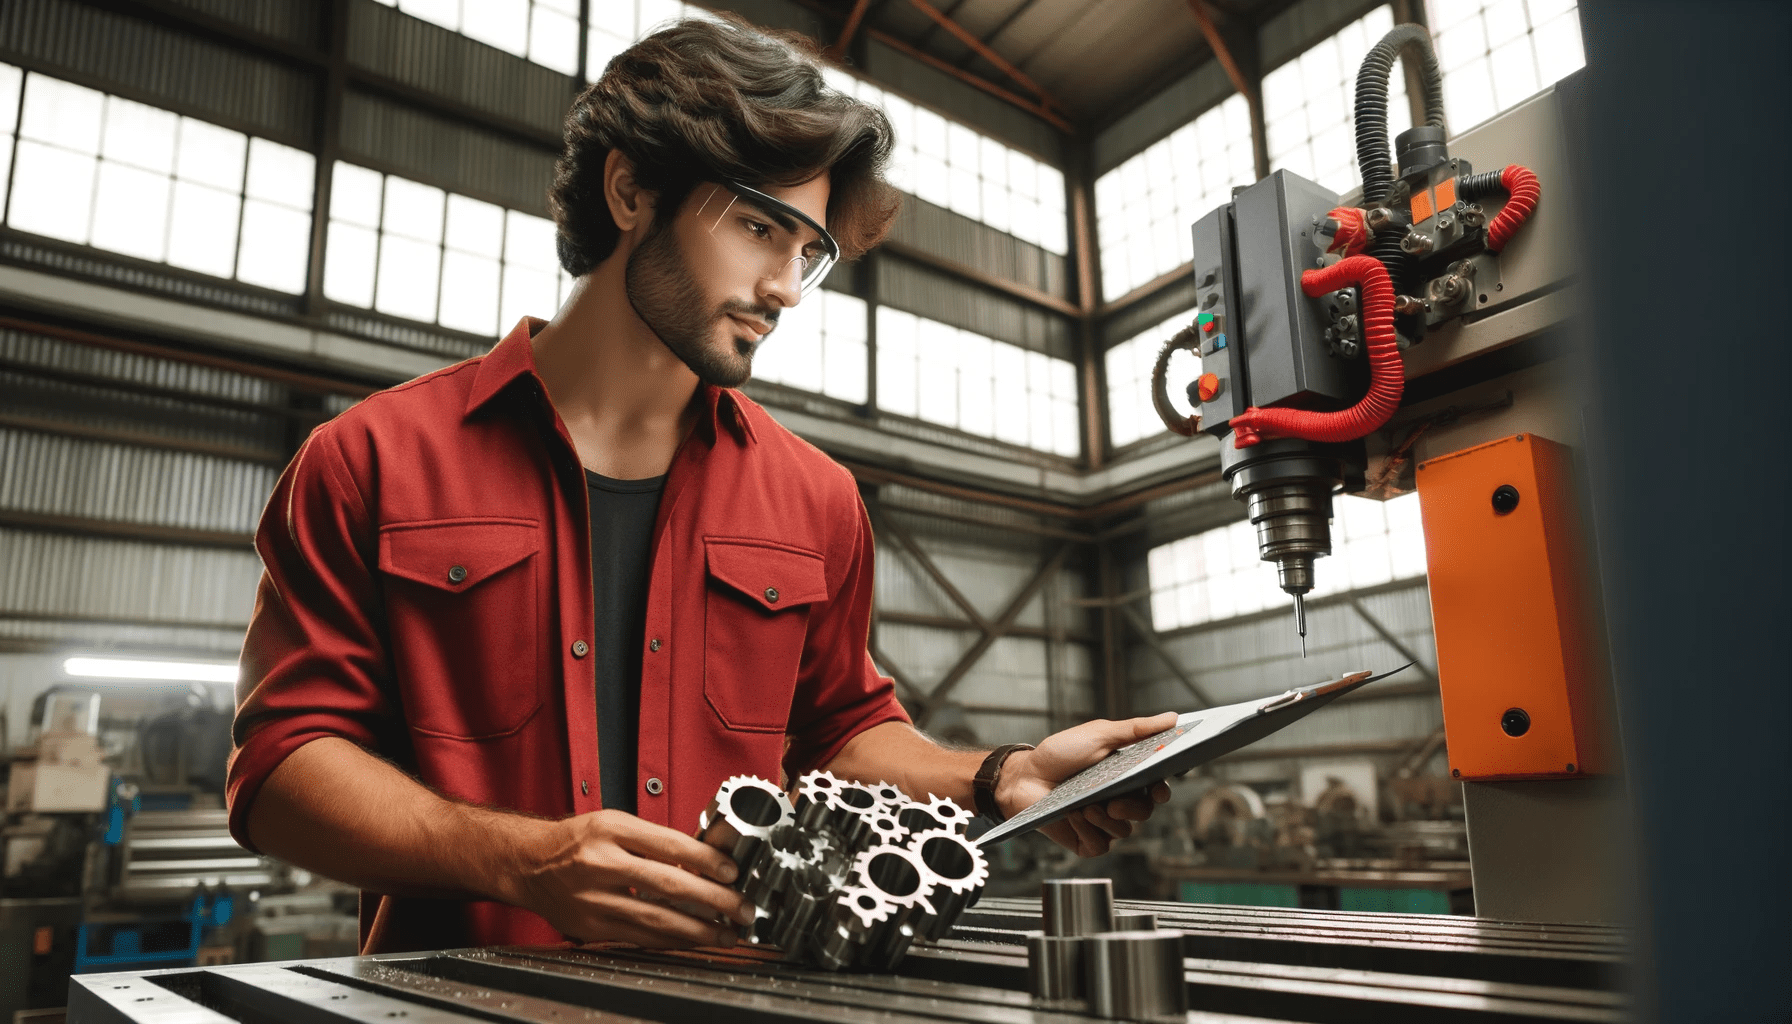 CNC machinist, with medium-length curly hair, wearing a red work shirt and safety goggles, is programming a CNC machine. The enviro